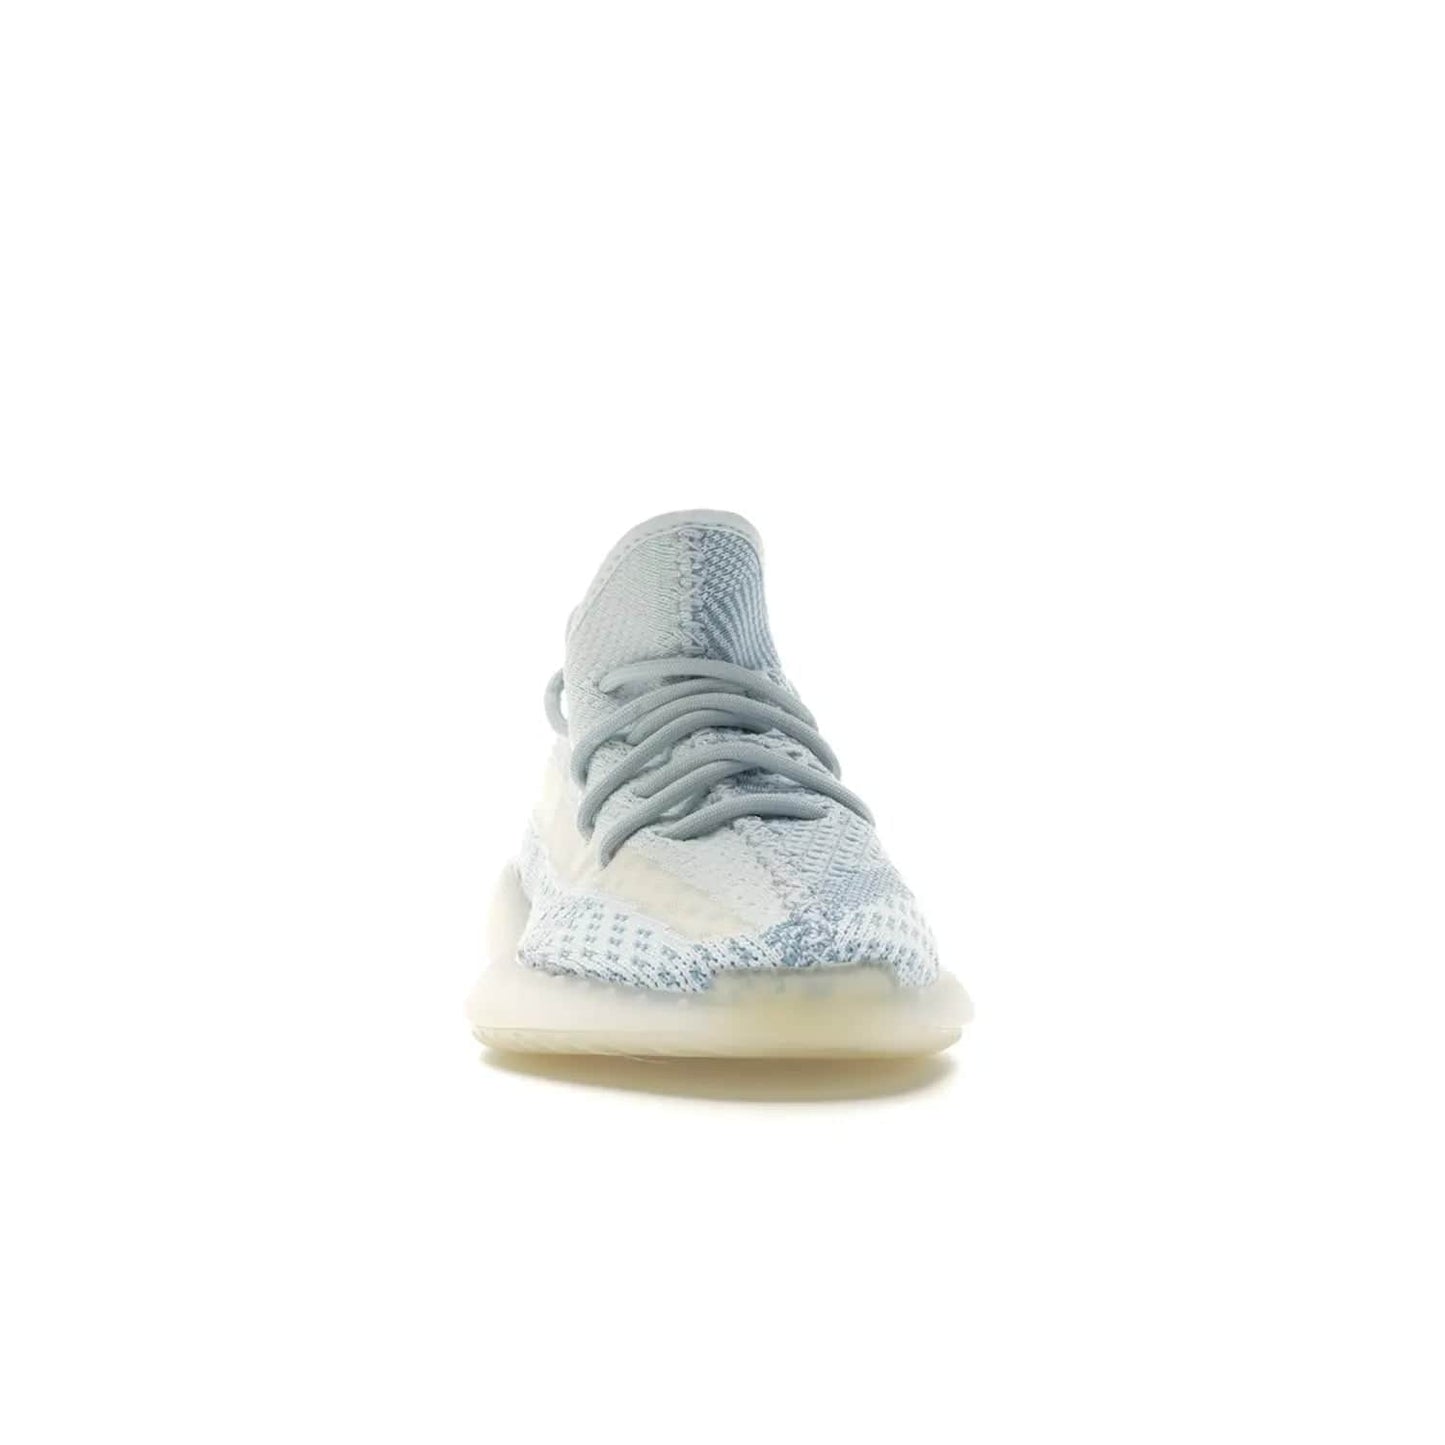 adidas Yeezy Boost 350 V2 Cloud White (Non-Reflective) - Image 9 - Only at www.BallersClubKickz.com - Adidas Yeezy Boost 350 V2 Cloud White (Non-Reflective) features Primeknit fabric and a unique, eye-catching design of cream, bluish-white, and transparent strip. Step out in timeless style with this eye-catching sneaker.